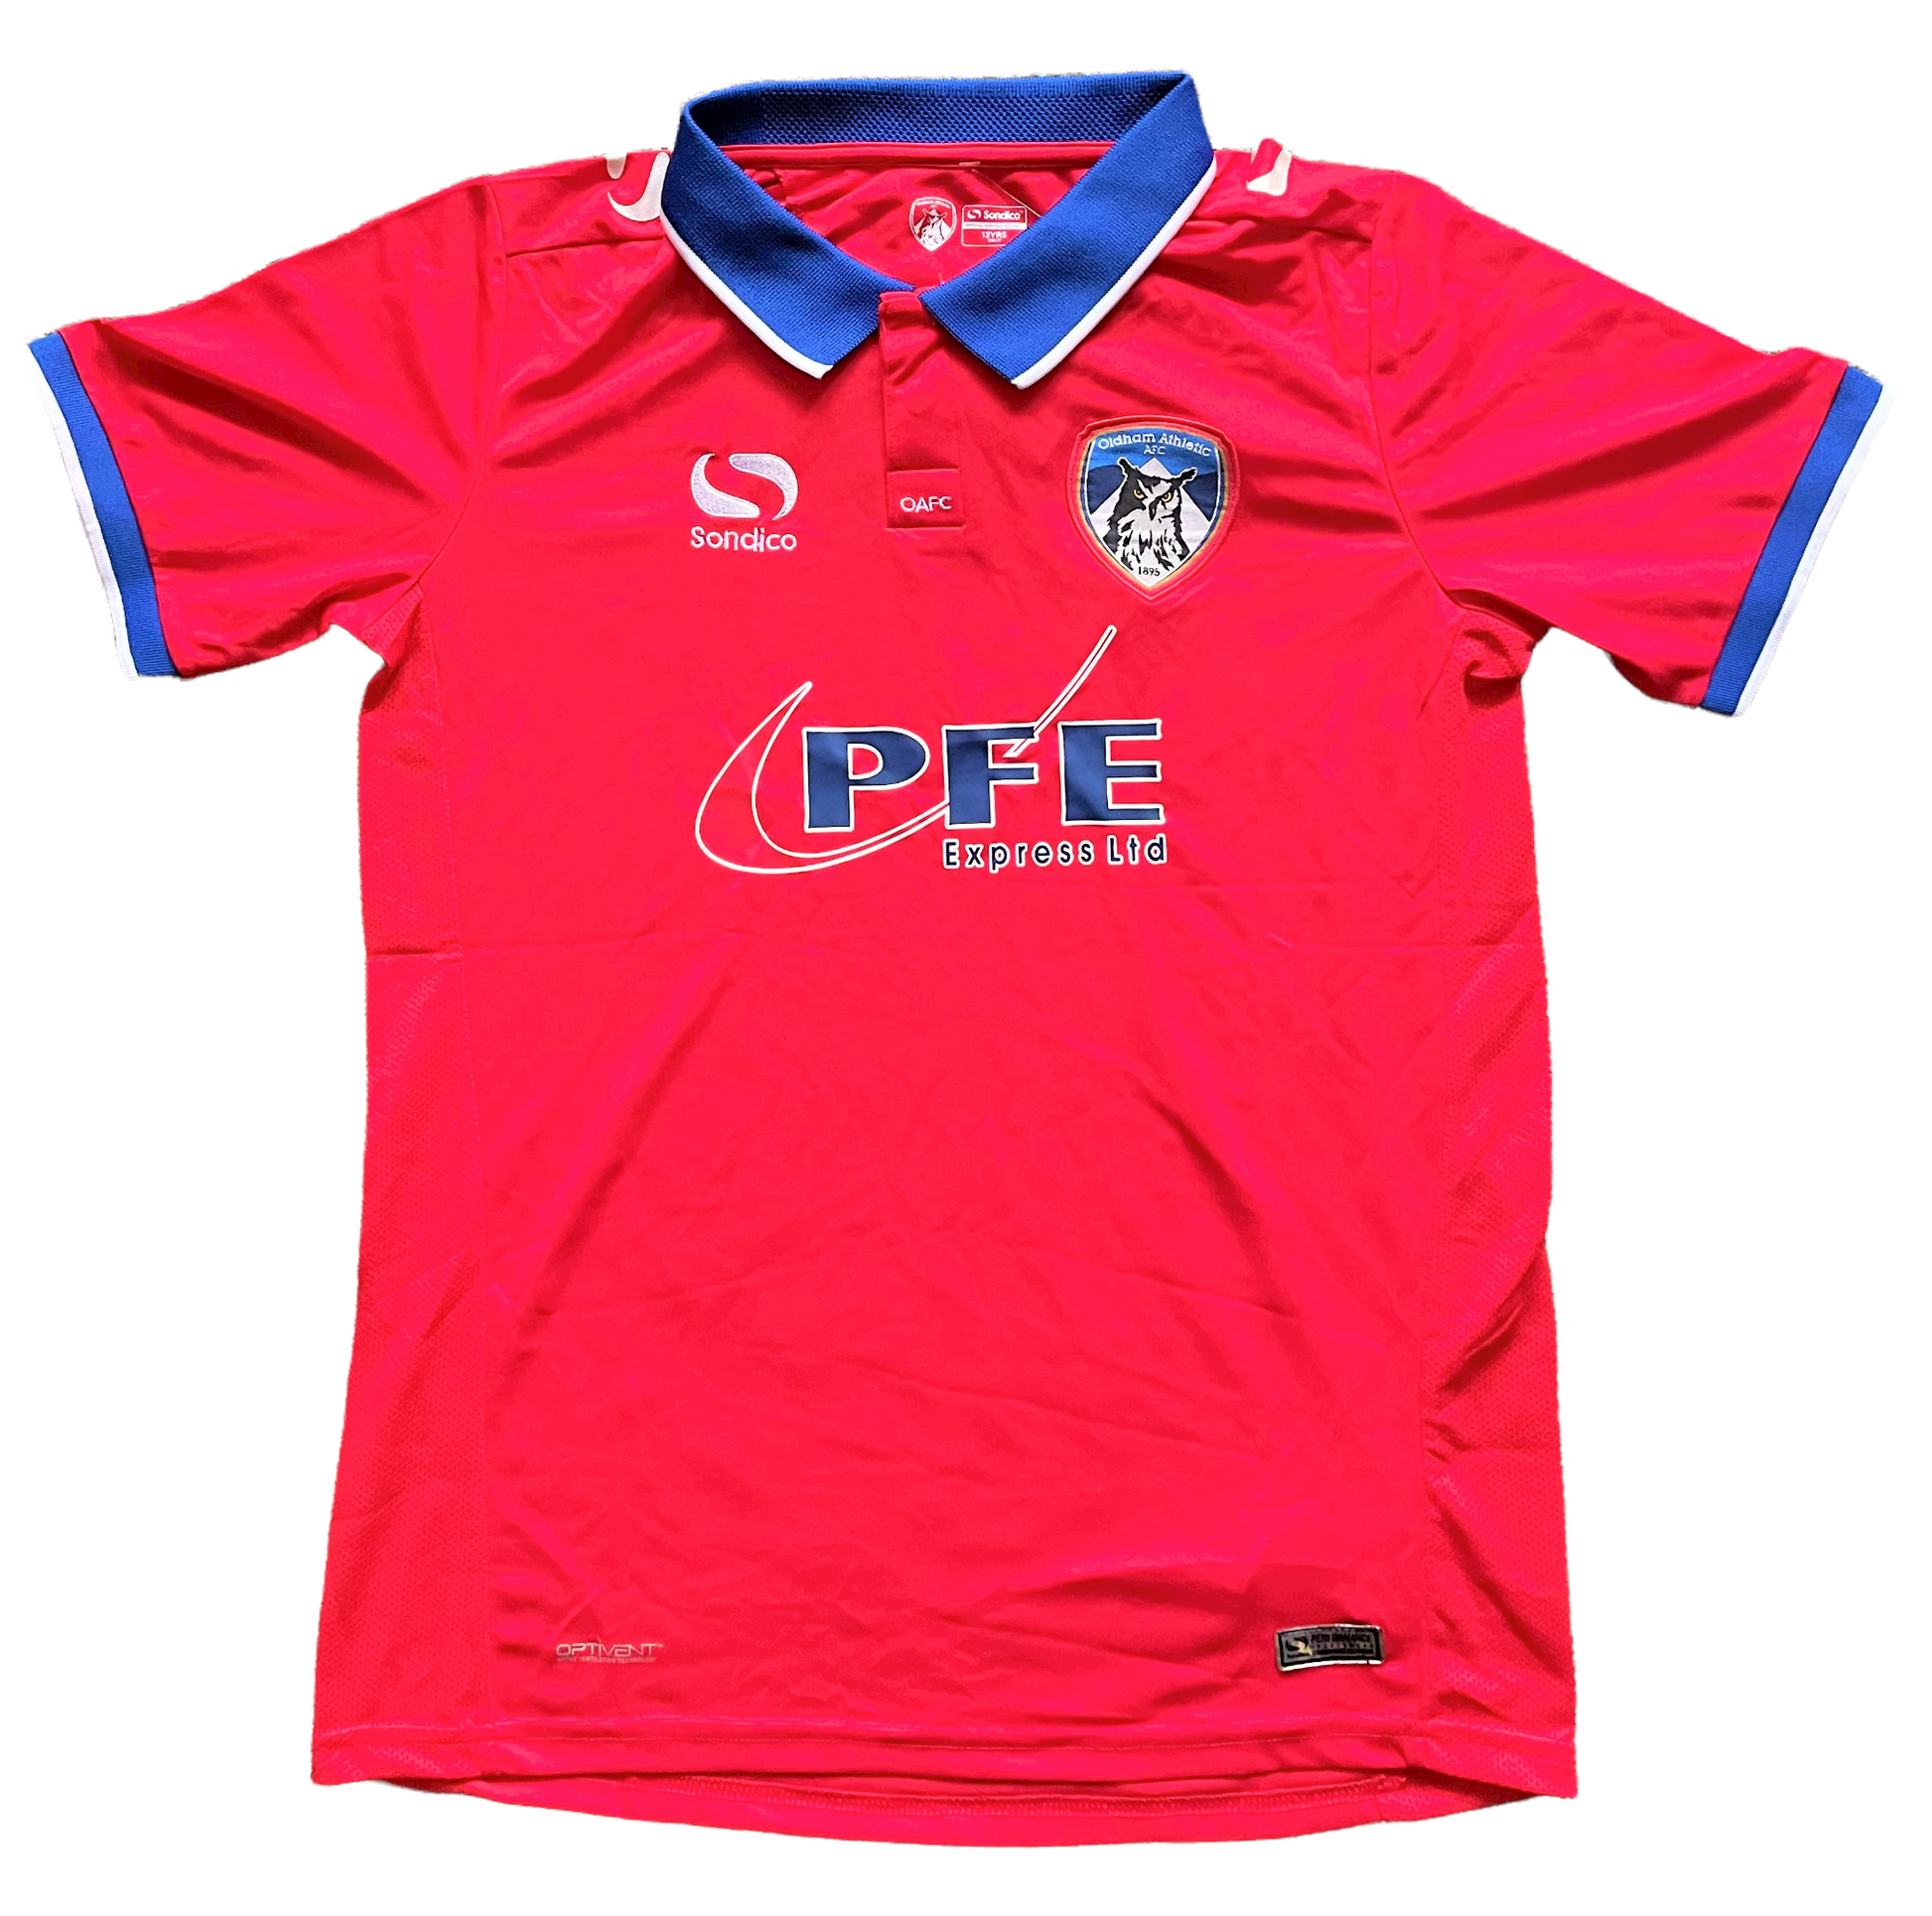 2015-16 Oldham Away Shirt (excellent) 13 years